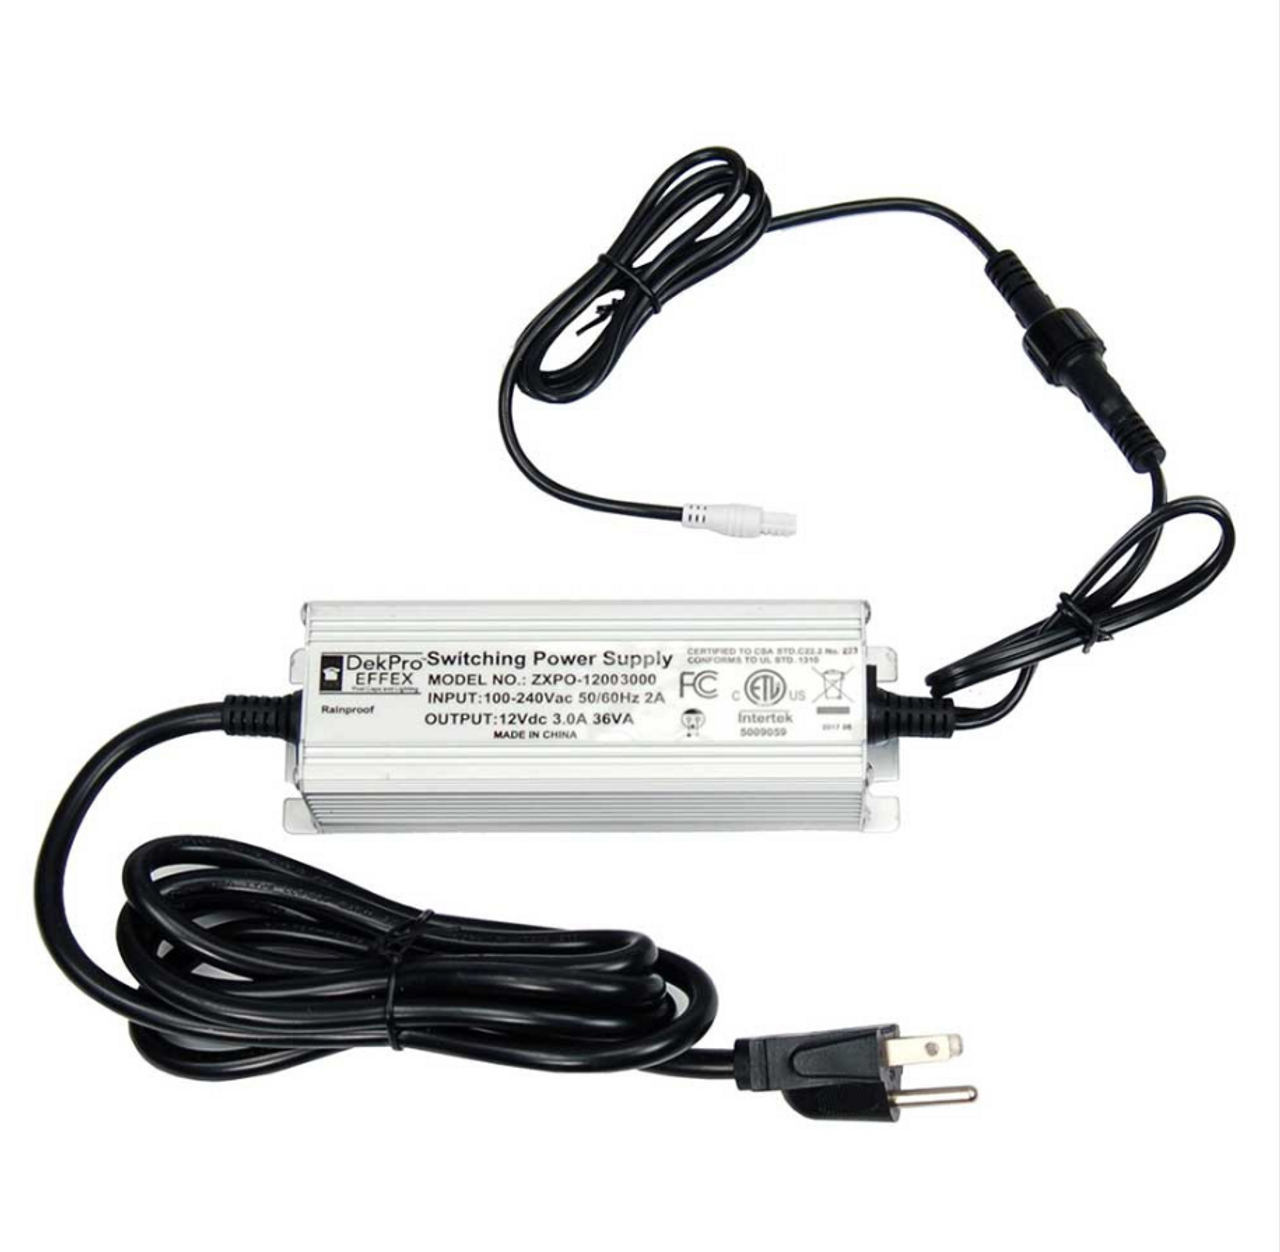 Outdoor DC Output Transformer to power LED lights